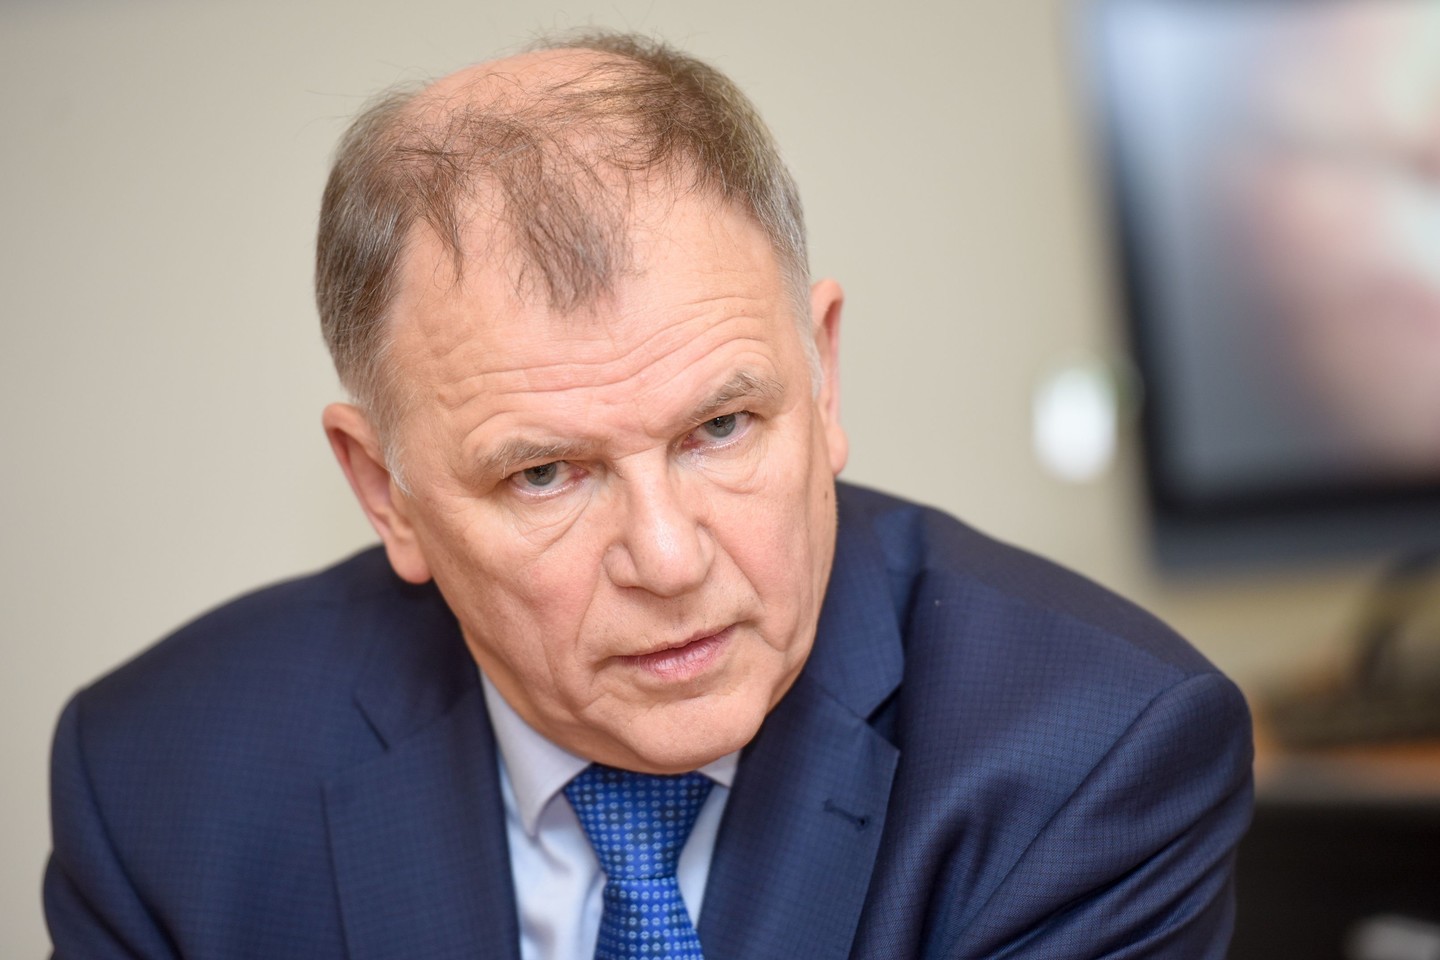  V.P.Andriukaitis.<br> D.Umbraso nuotr. iš archyvo